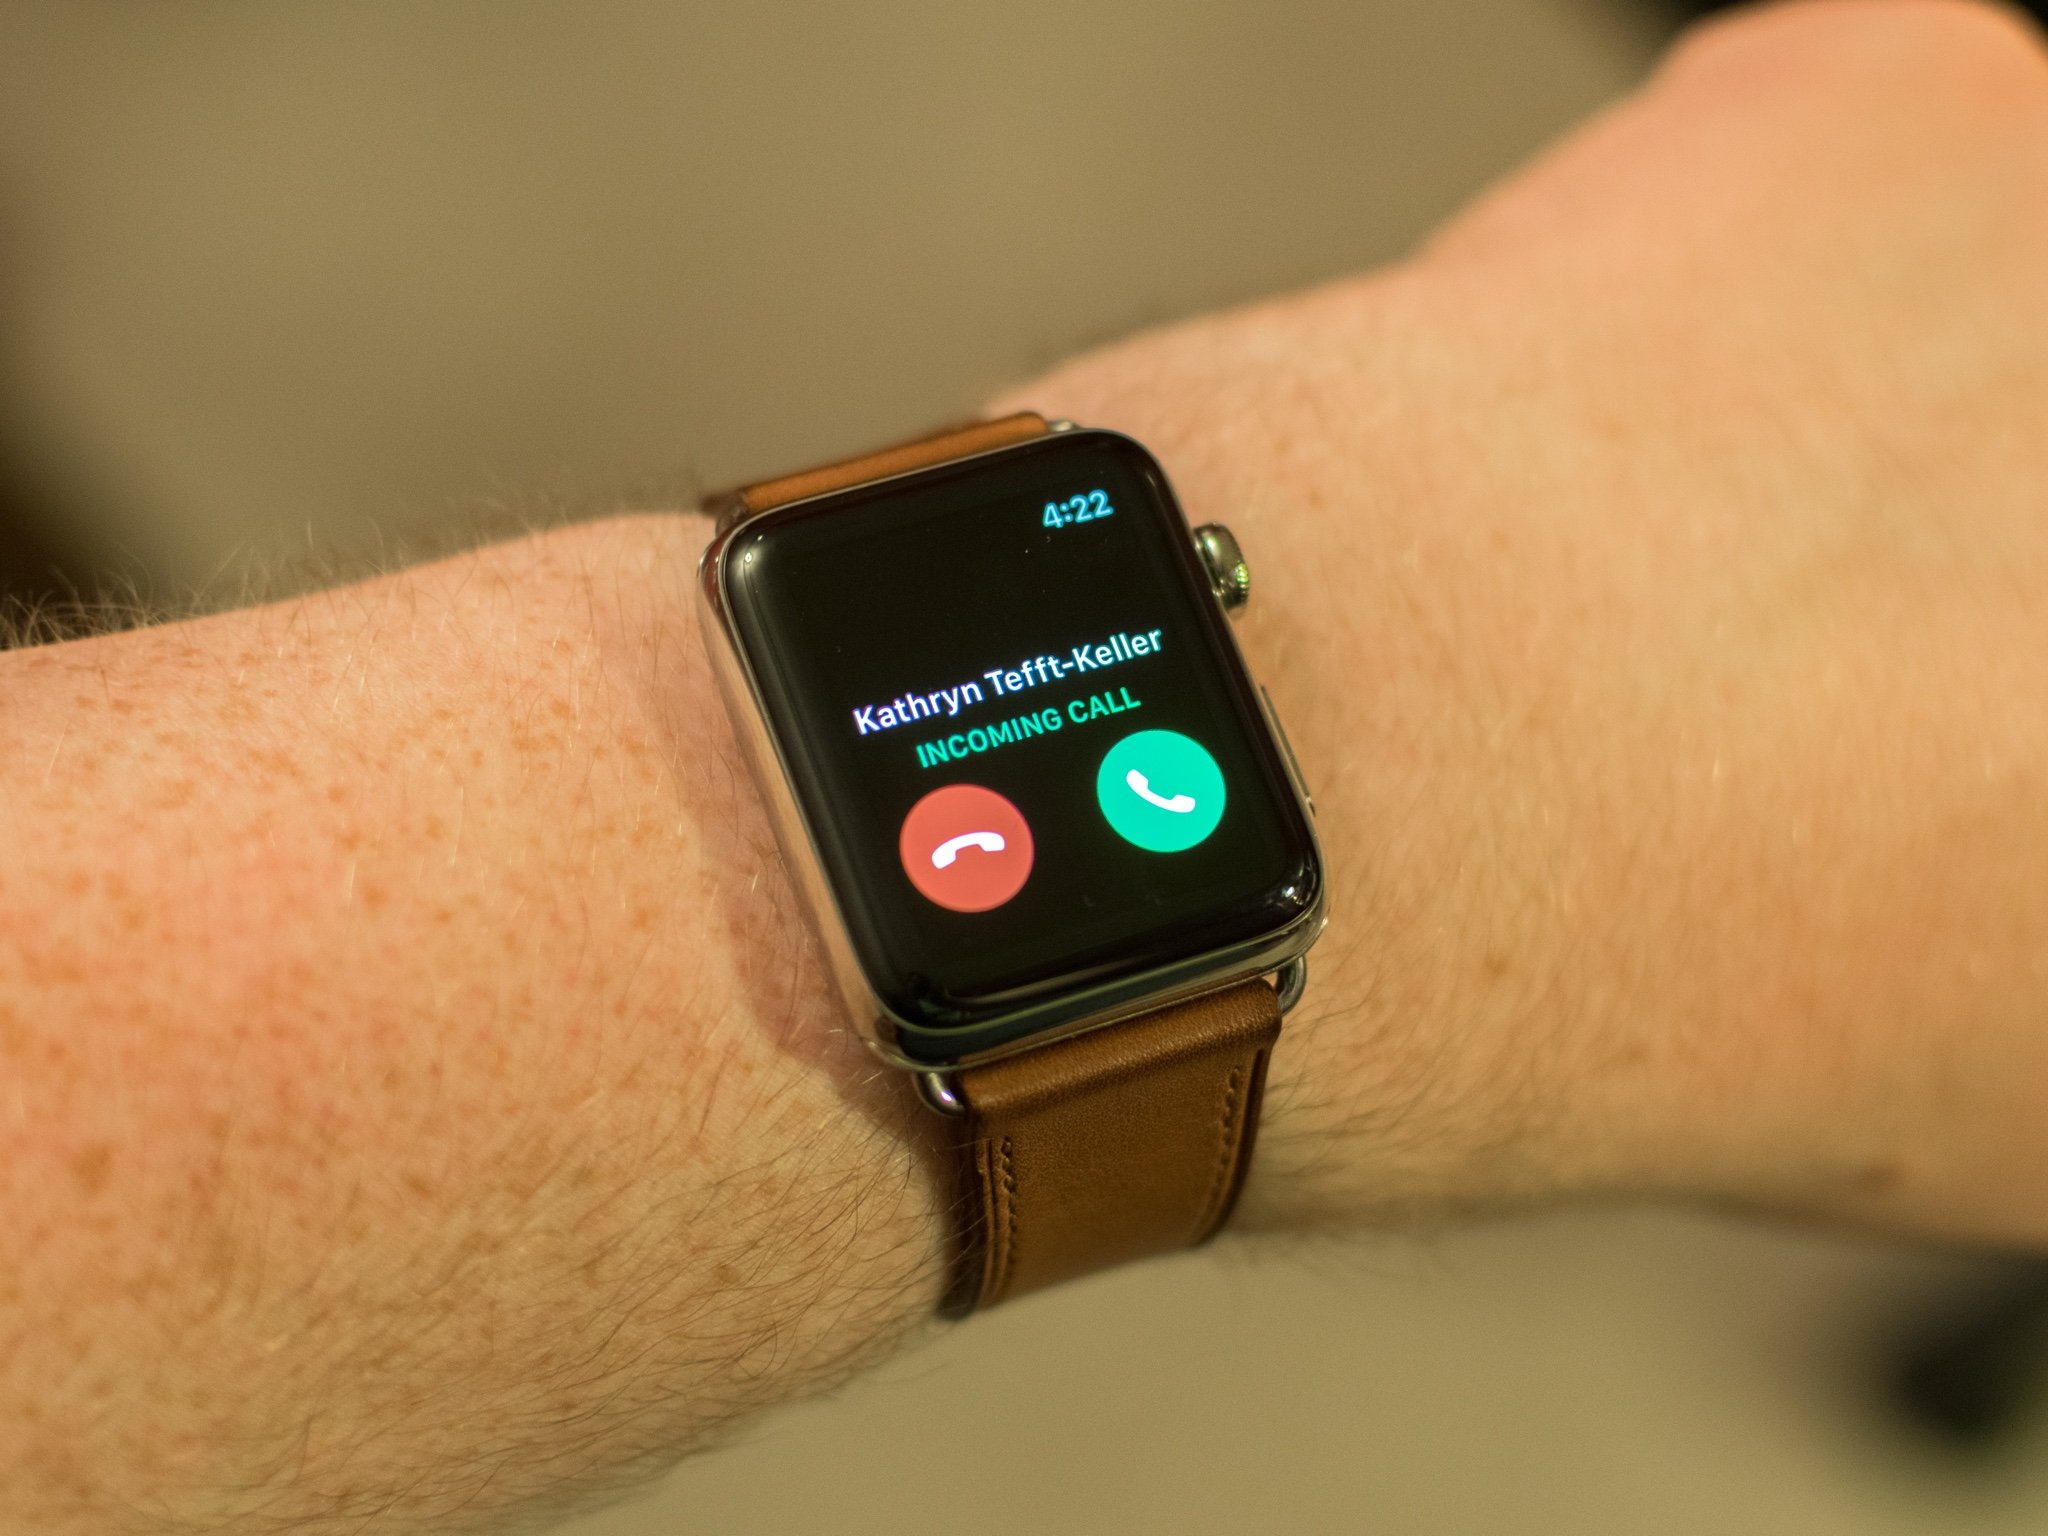 How To Make Phone Calls With The Apple Watch